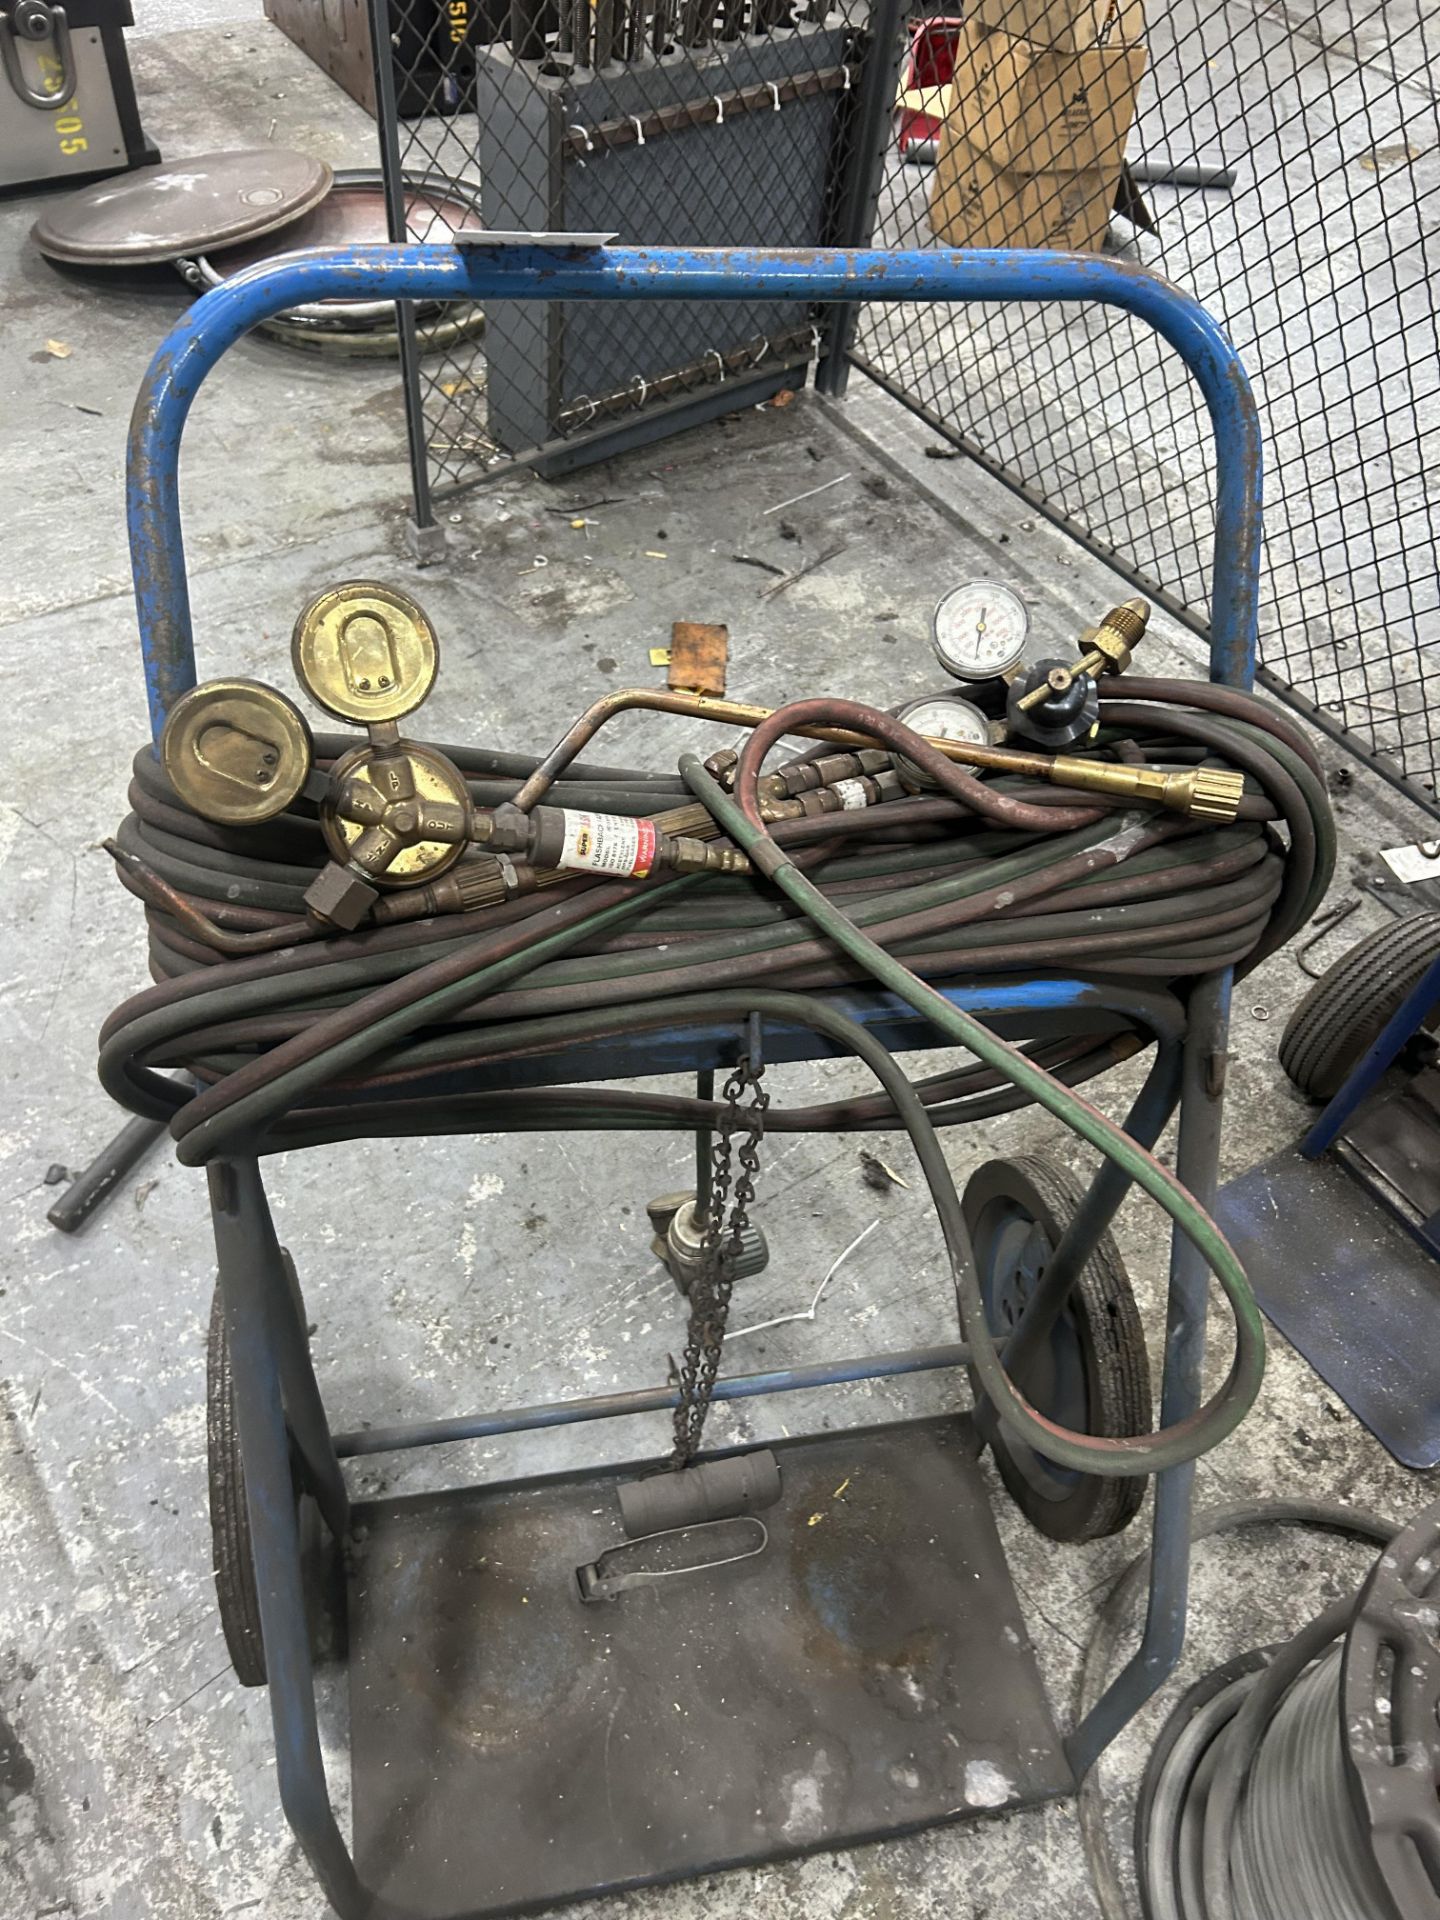 Acetylene cart with hoses, gauges and gun